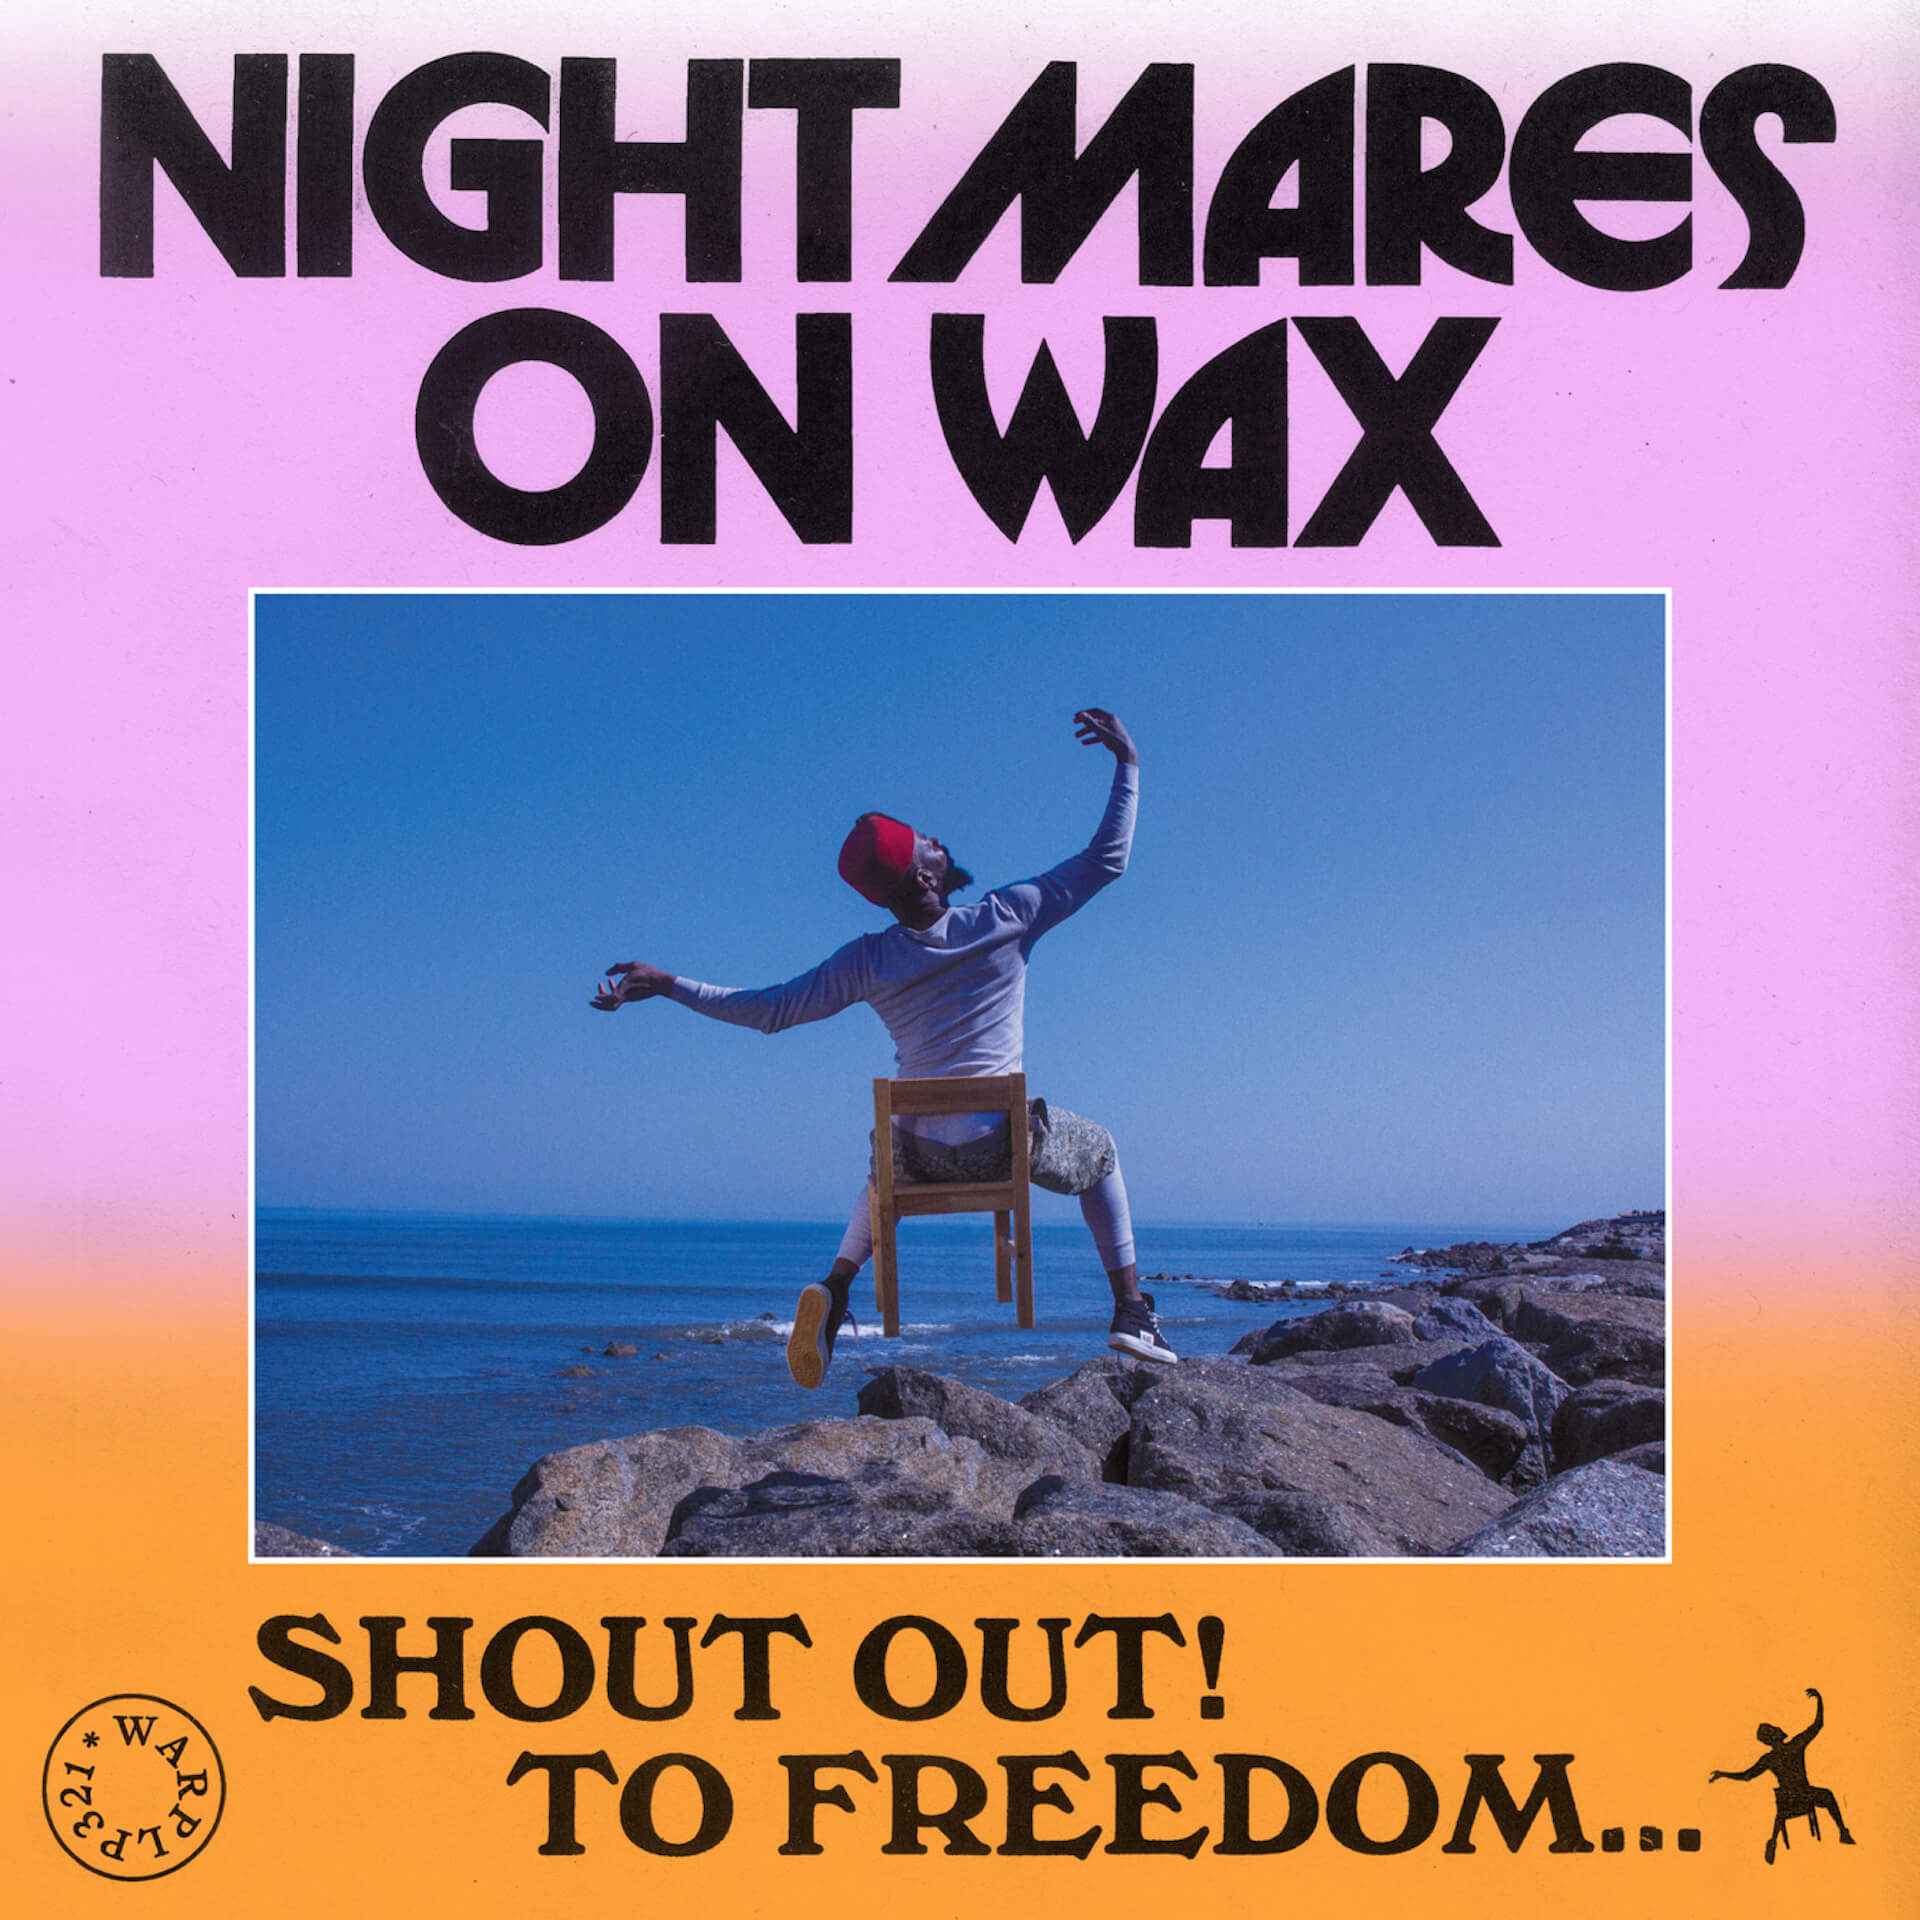 Nightmares On Waxの最新作『Shout Out！ To Freedom…』が本日リリース！収録曲7曲のパフォーマンス映像も解禁 music211029_nightmaresonwax_7